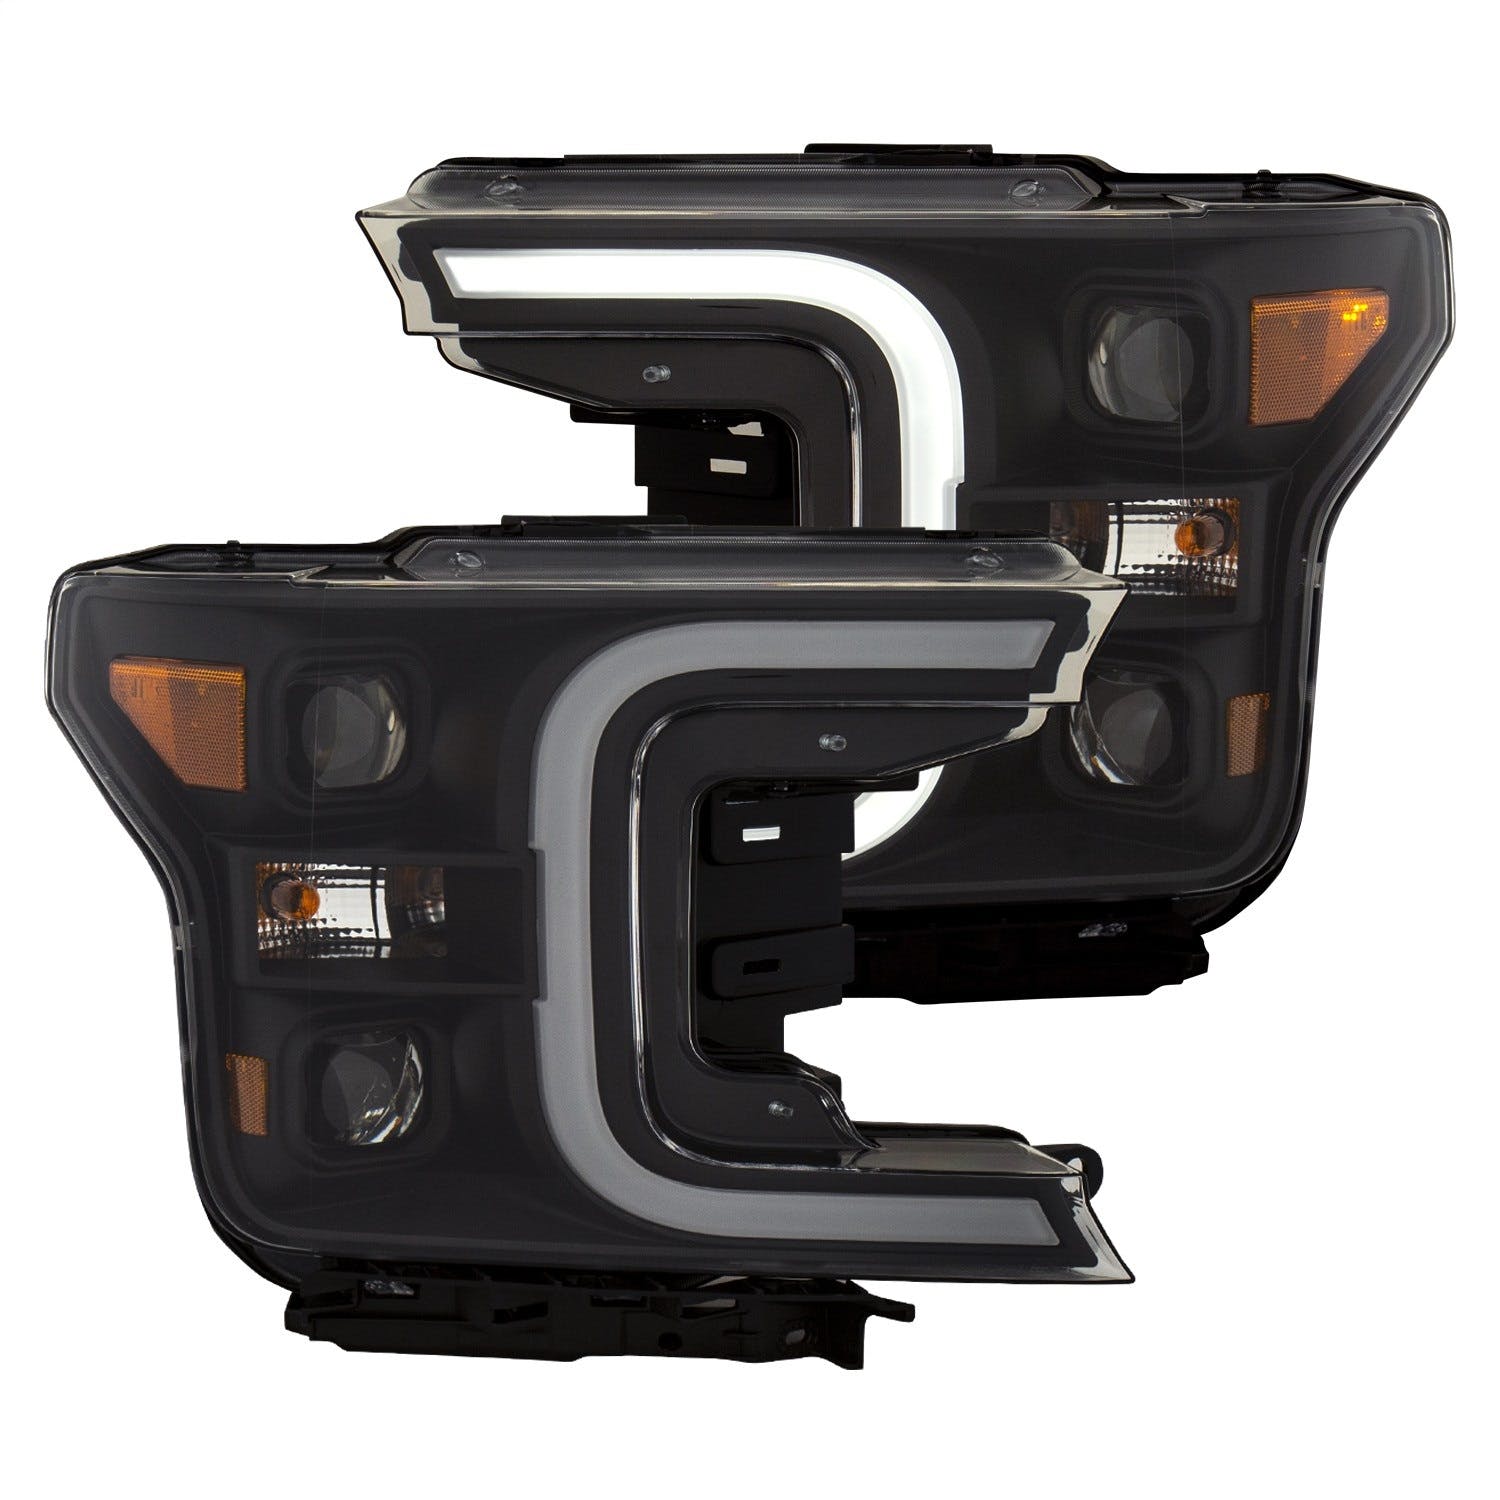 AnzoUSA 111398 Projector Headlights with Plank Style Switchback Black with Amber